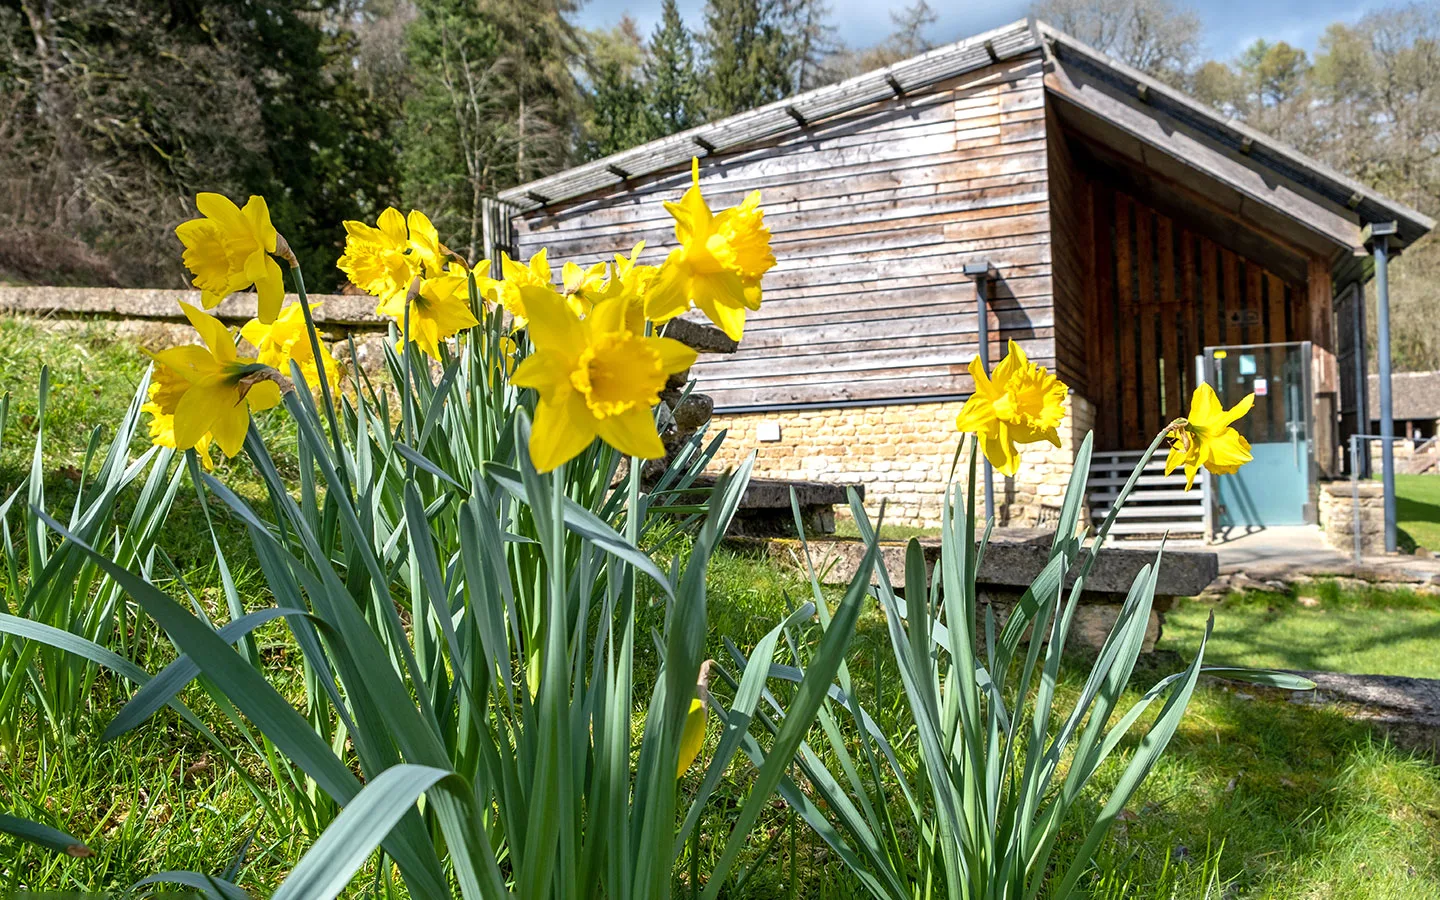 The shelter covering the West Range and daffodils